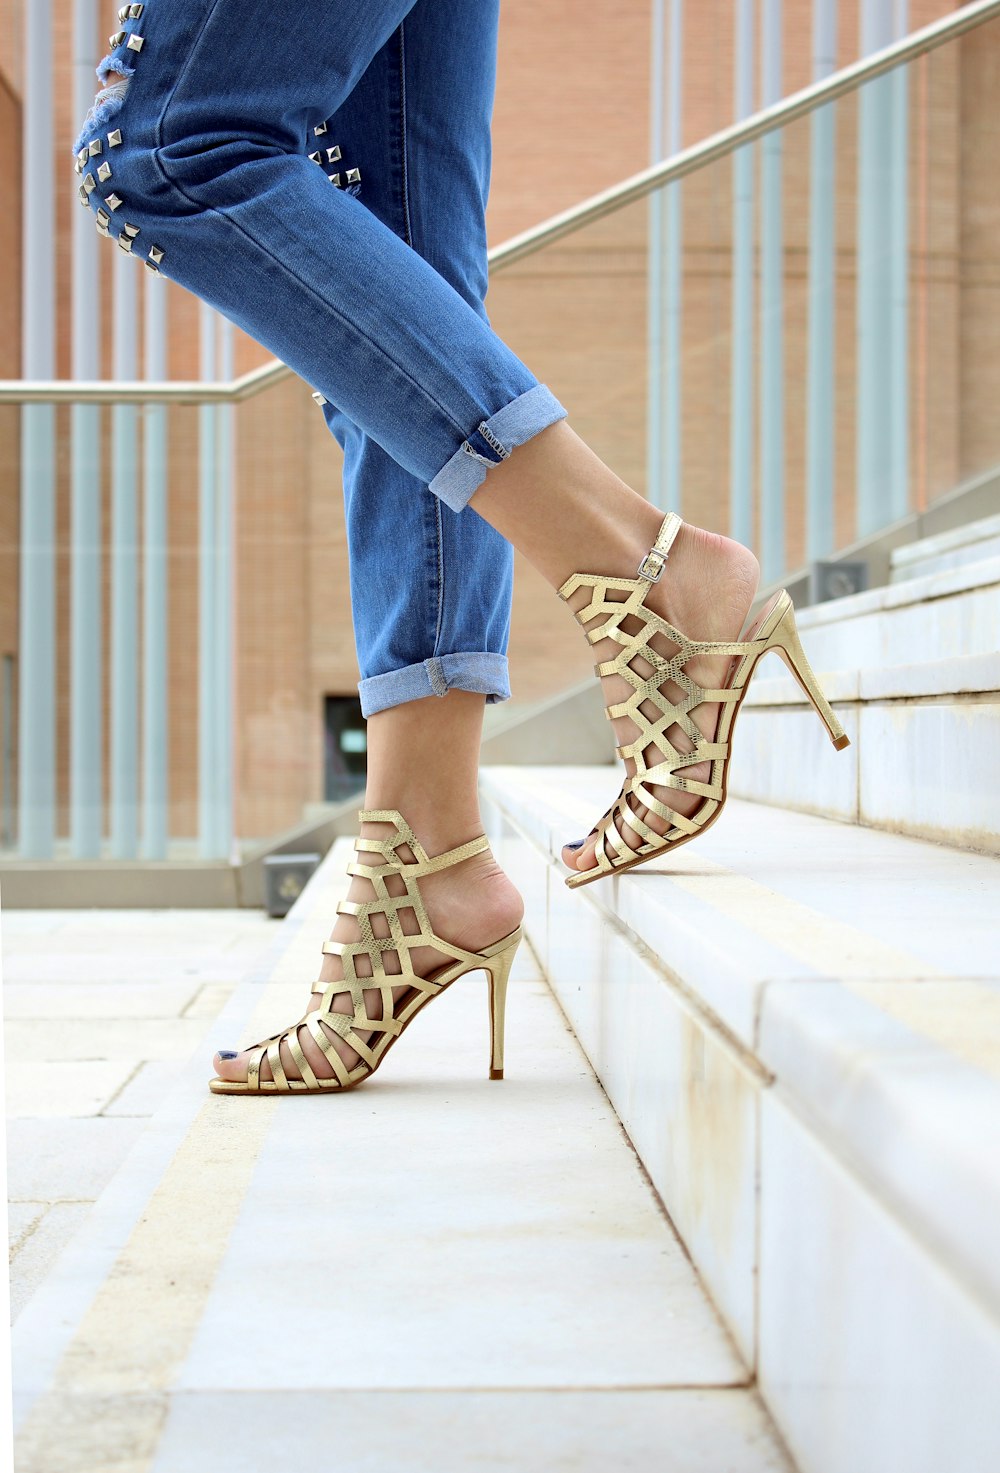 High Heel Shoes Pictures | Download Free Images on Unsplash